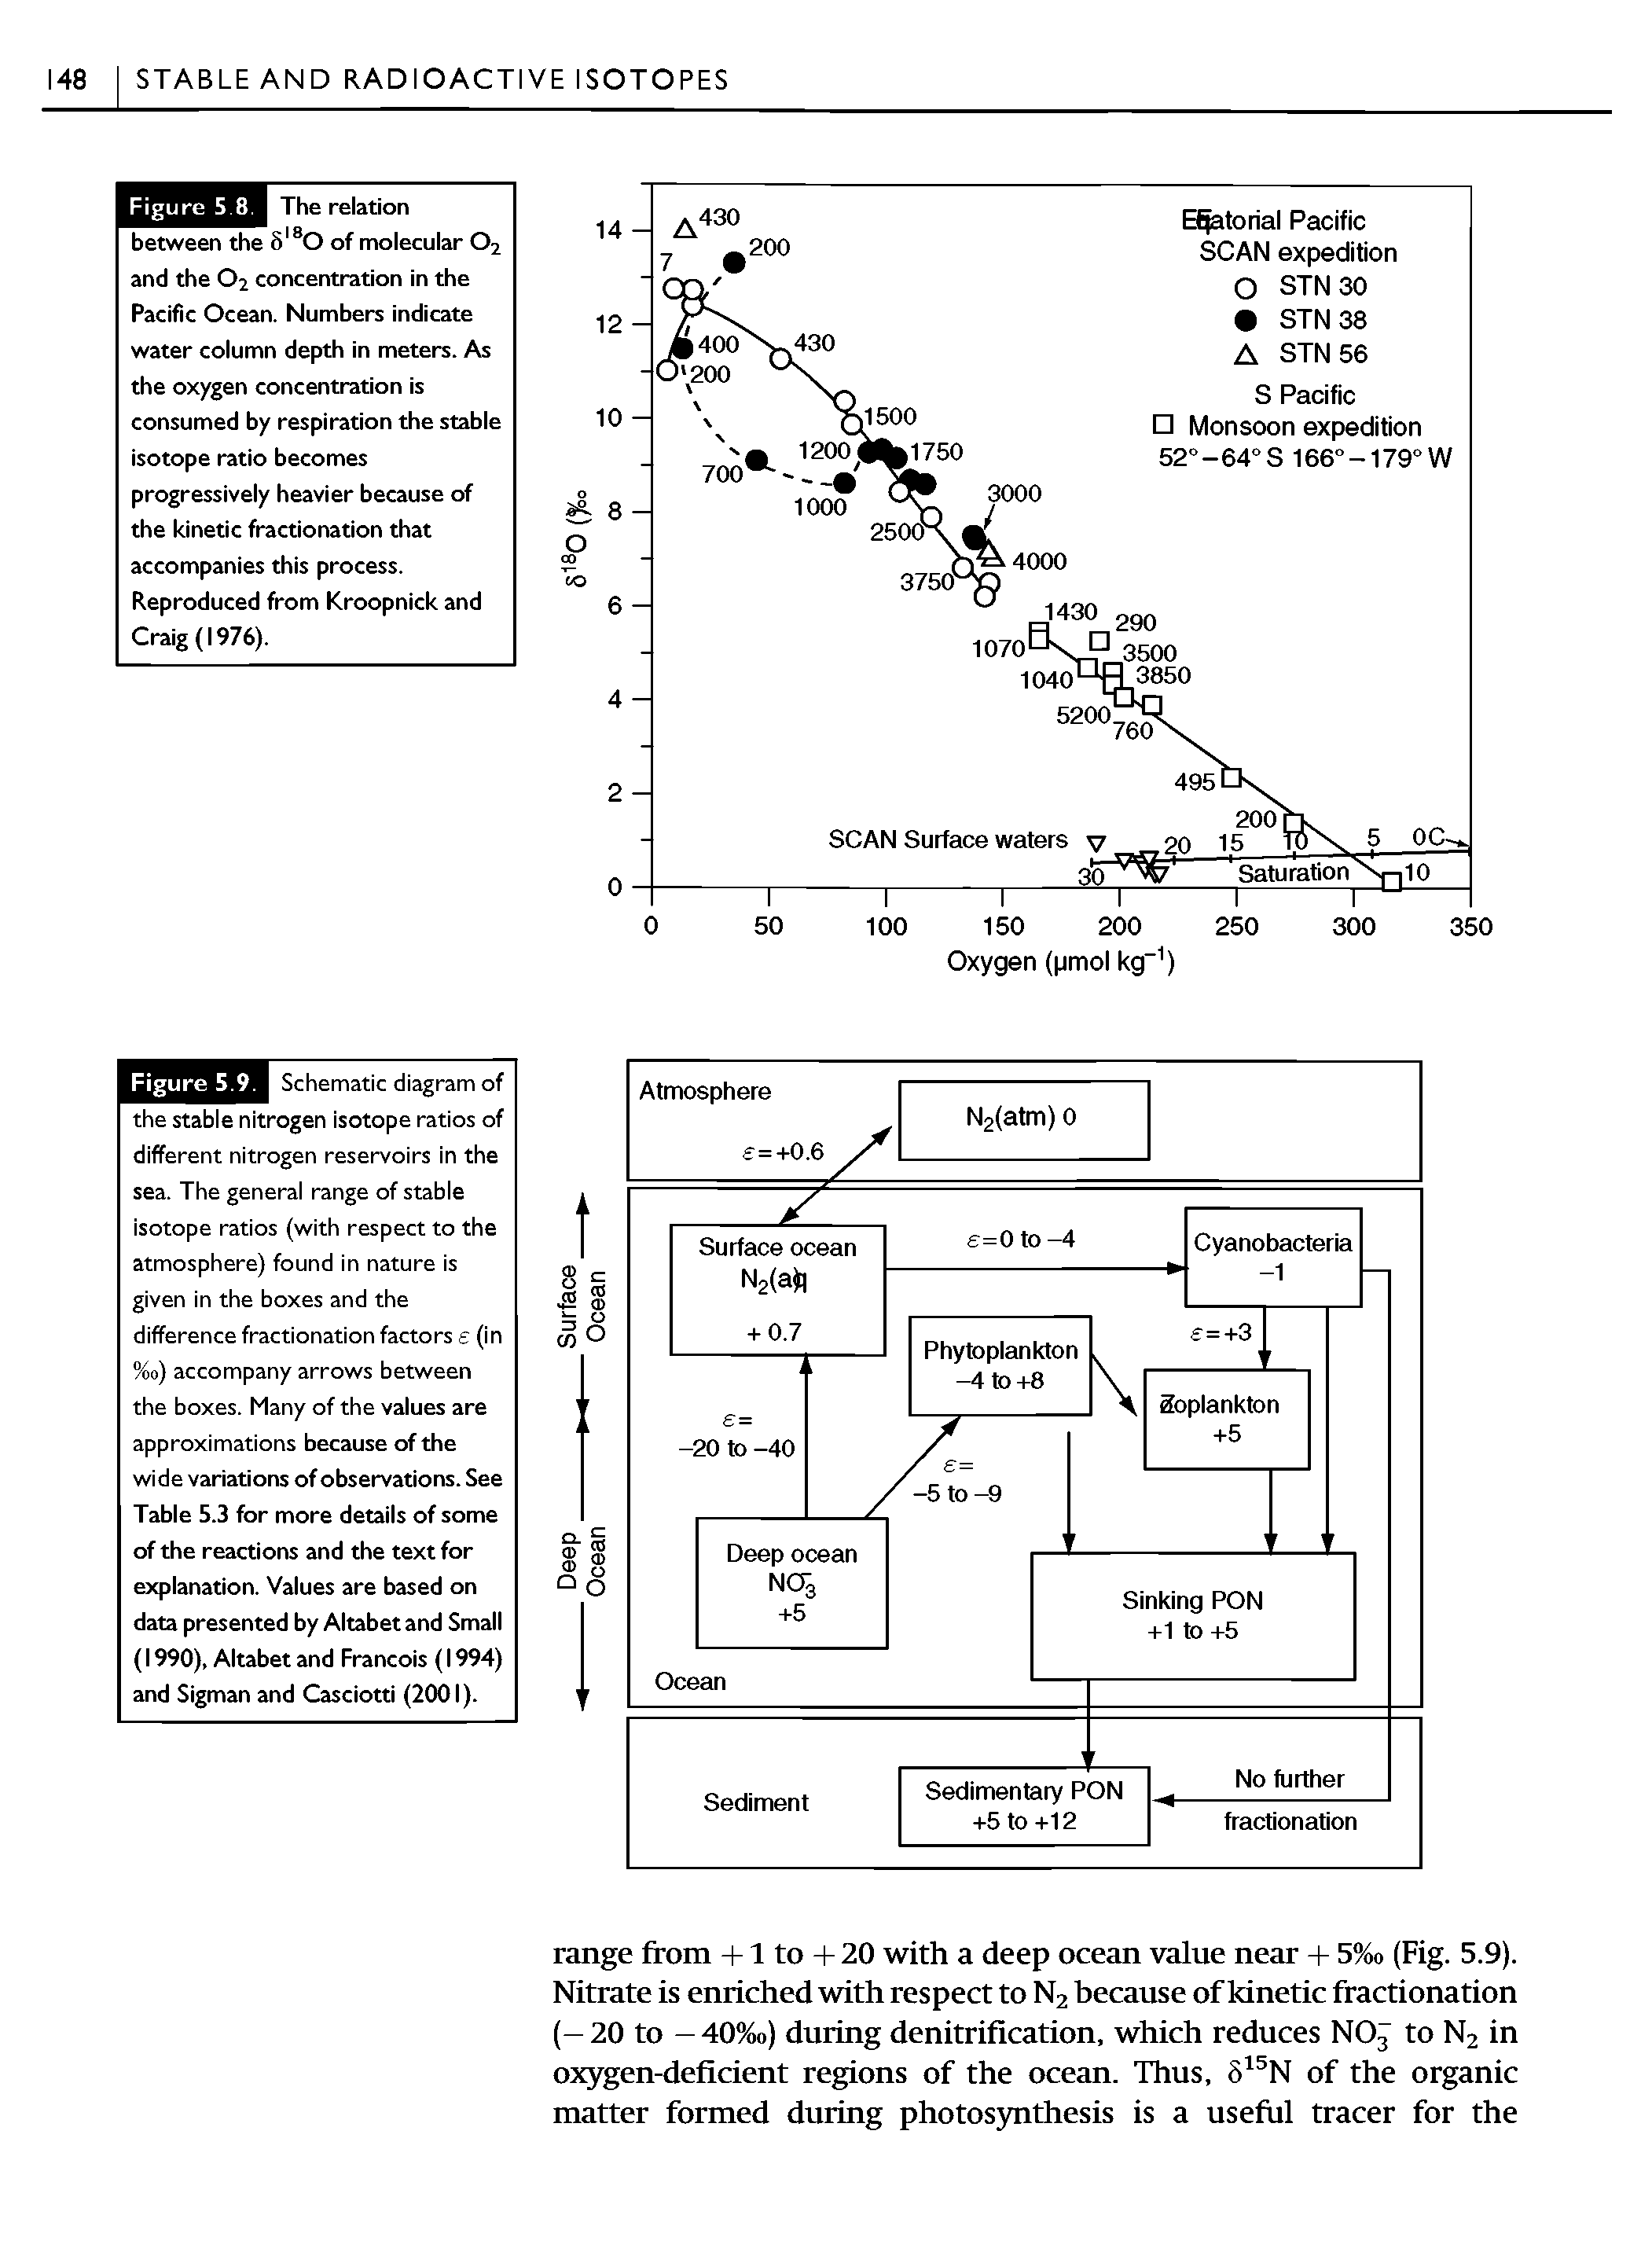 Schematic diagram of the stable nitrogen isotope ratios of different nitrogen reservoirs in the sea. The general range of stable isotope ratios (with respect to the atmosphere) found in nature is given in the boxes and the difference fractionation factors e (in %o) accompany arrows between the boxes. Many of the values are approximations because of the wide variations of observations. See Table 5.3 for more details of some of the reactions and the text for explanation. Values are based on data presented by Altabet and Small (1990), Altabet and Francois (1994) and Sigman and Casciotti (2001).